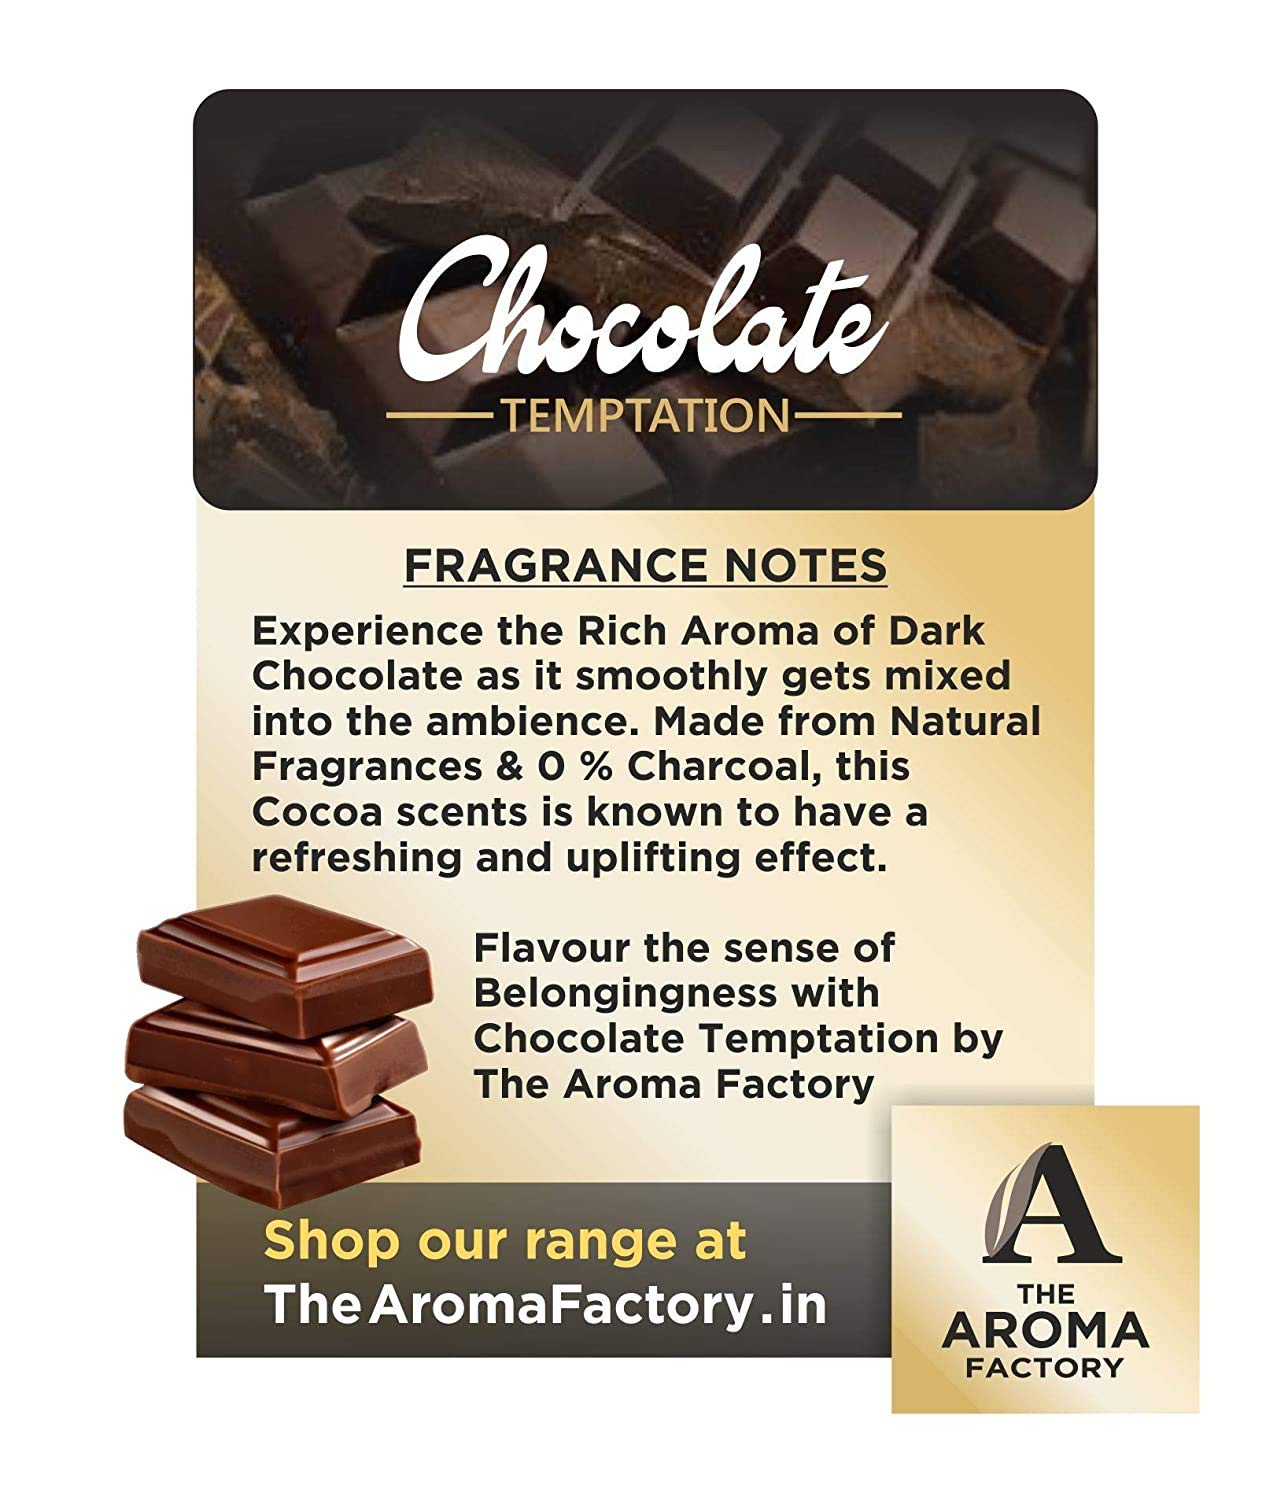 The Aroma Factory Chocolate & Mogra Agarbatti (Charcoal Free & Low Smoke) Bottle Pack of 2 x 100